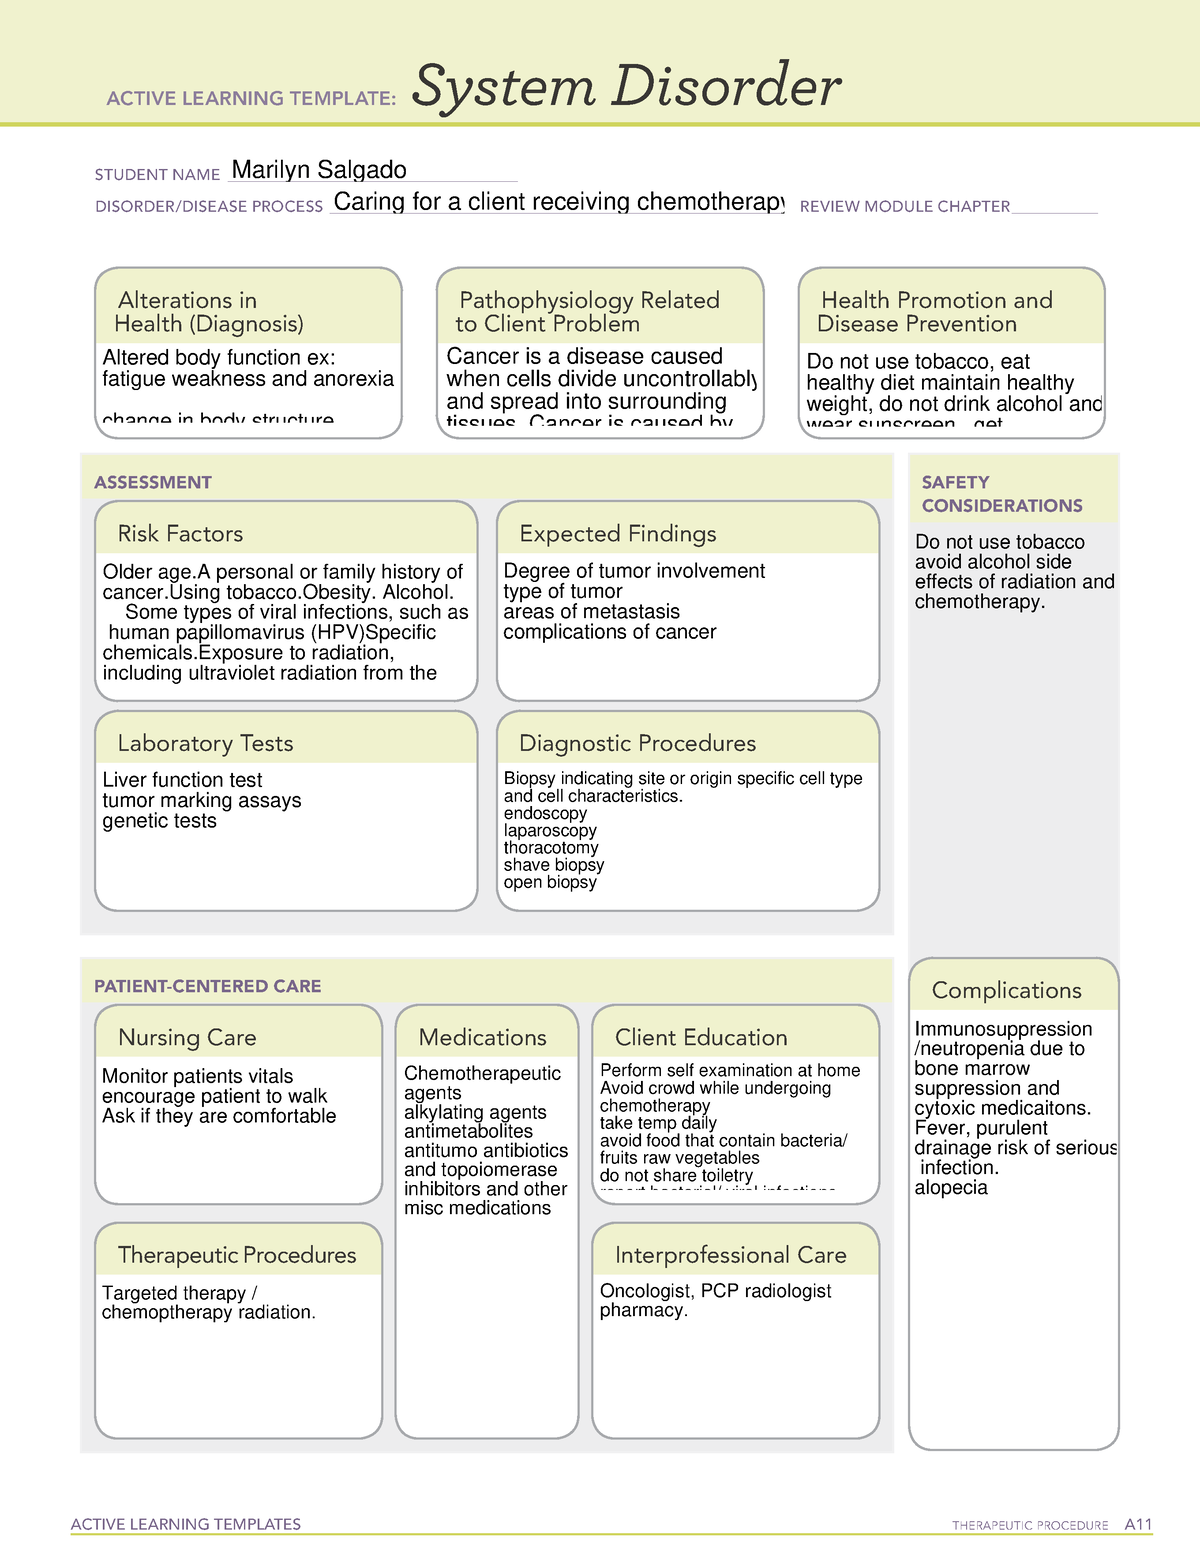 Active Learning Template sys Disorder ACTIVE LEARNING TEMPLATES